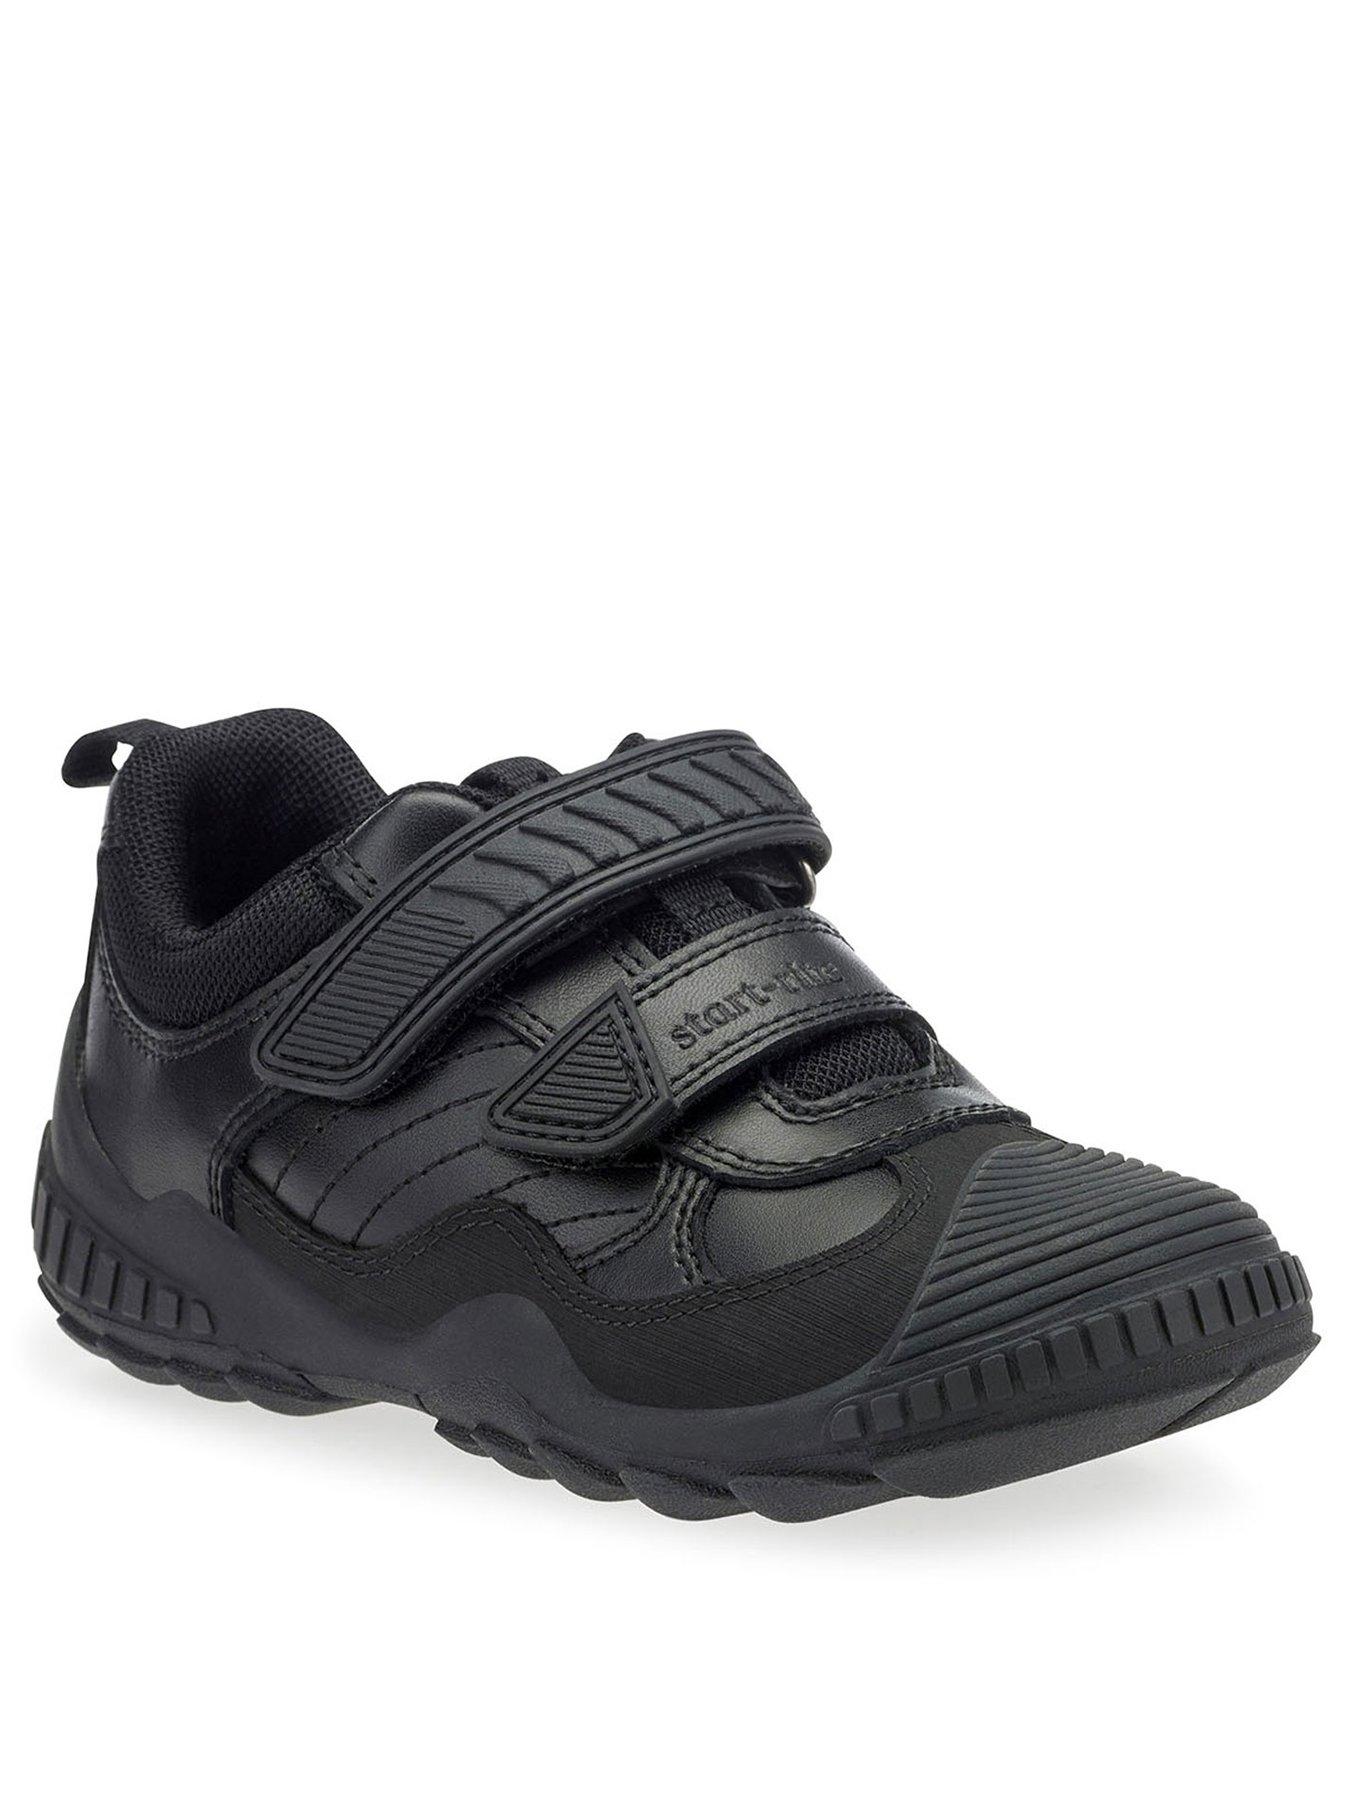 Start-rite Boys Extreme School Shoes - Black Leather | very.co.uk